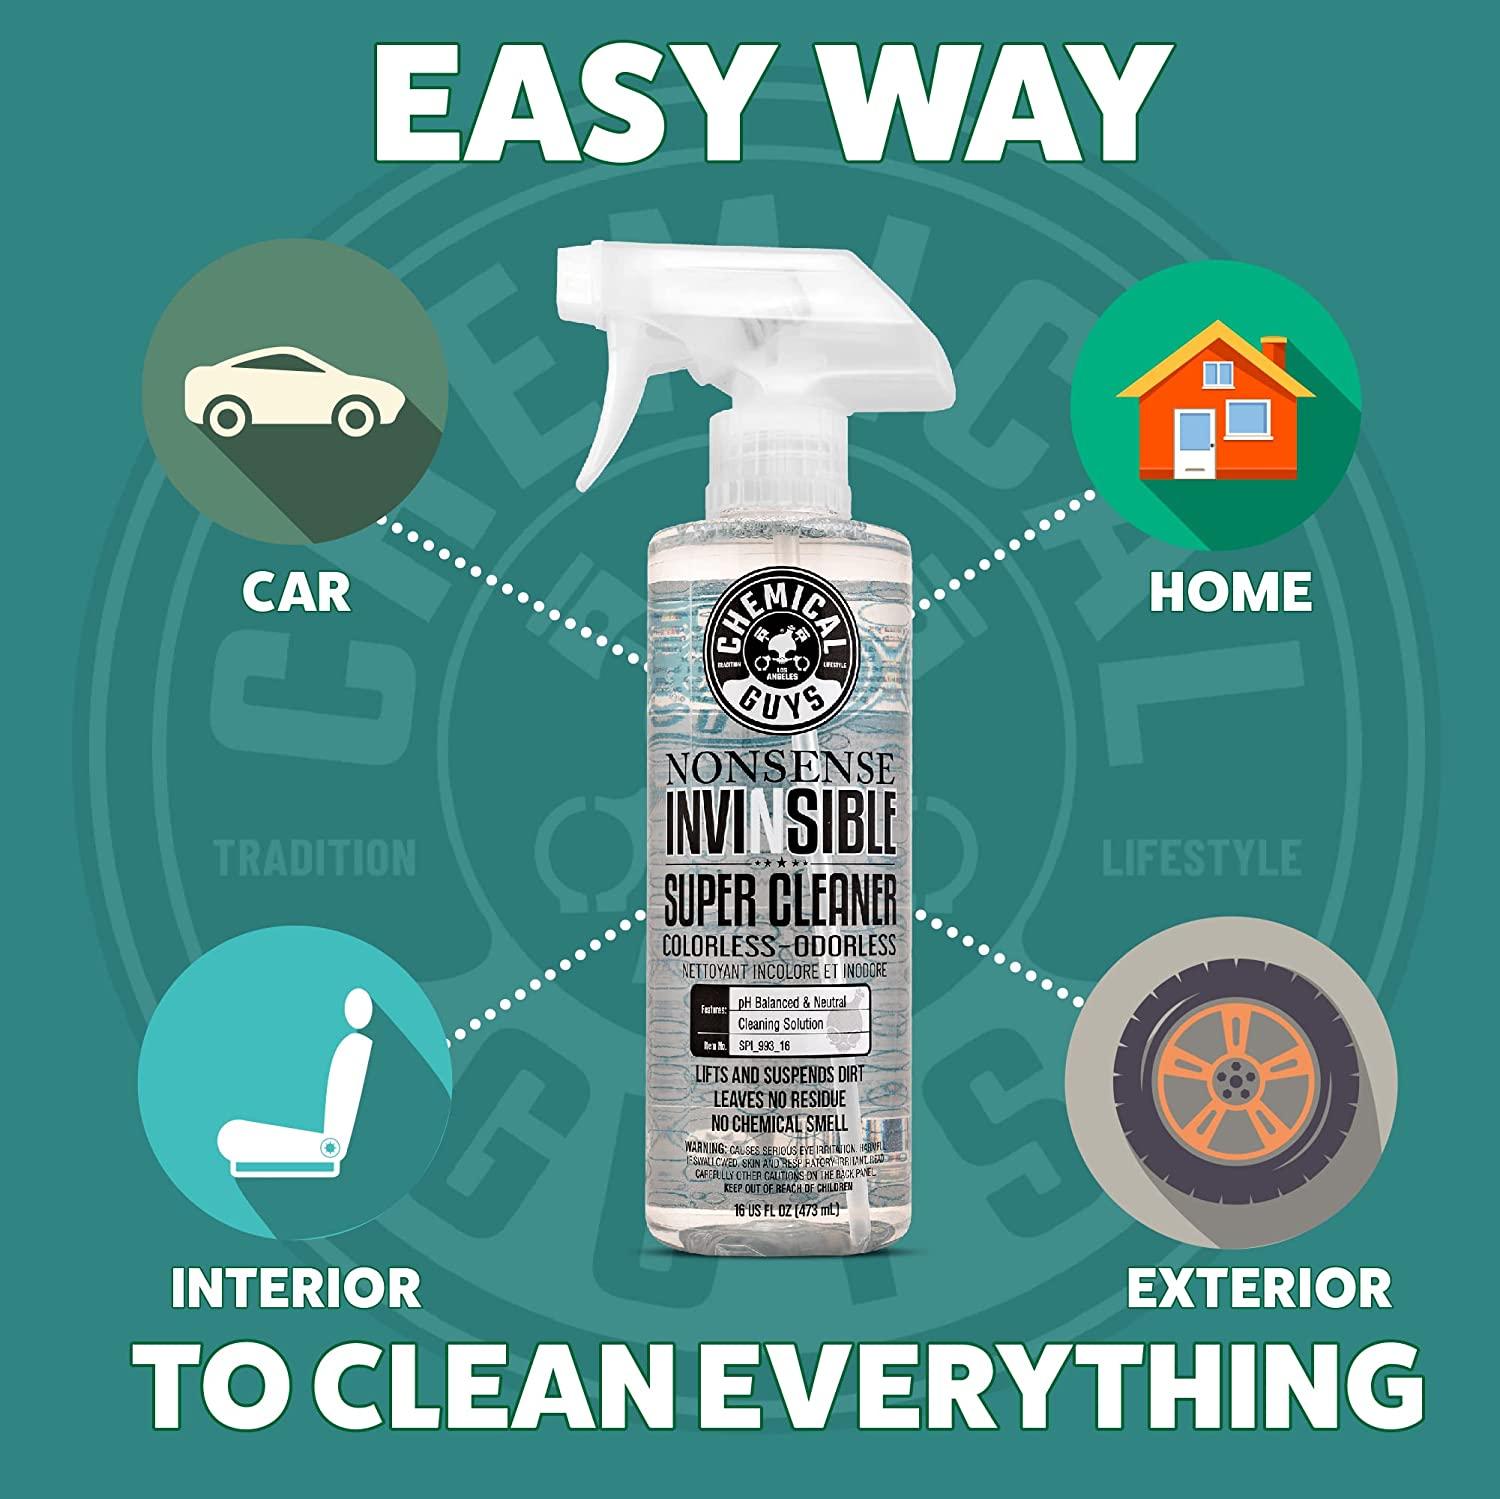  Chemical Guys SPI_993_64 Nonsense All Surface Cleaner (Works on  Vinyl, Rubber, Plastic, Carpet) Safe for Home, Garage, Cars, Trucks, SUVs,  Jeeps, Motorcycles, & RVs, 64 fl. Oz (Half Gallon), Unscented 